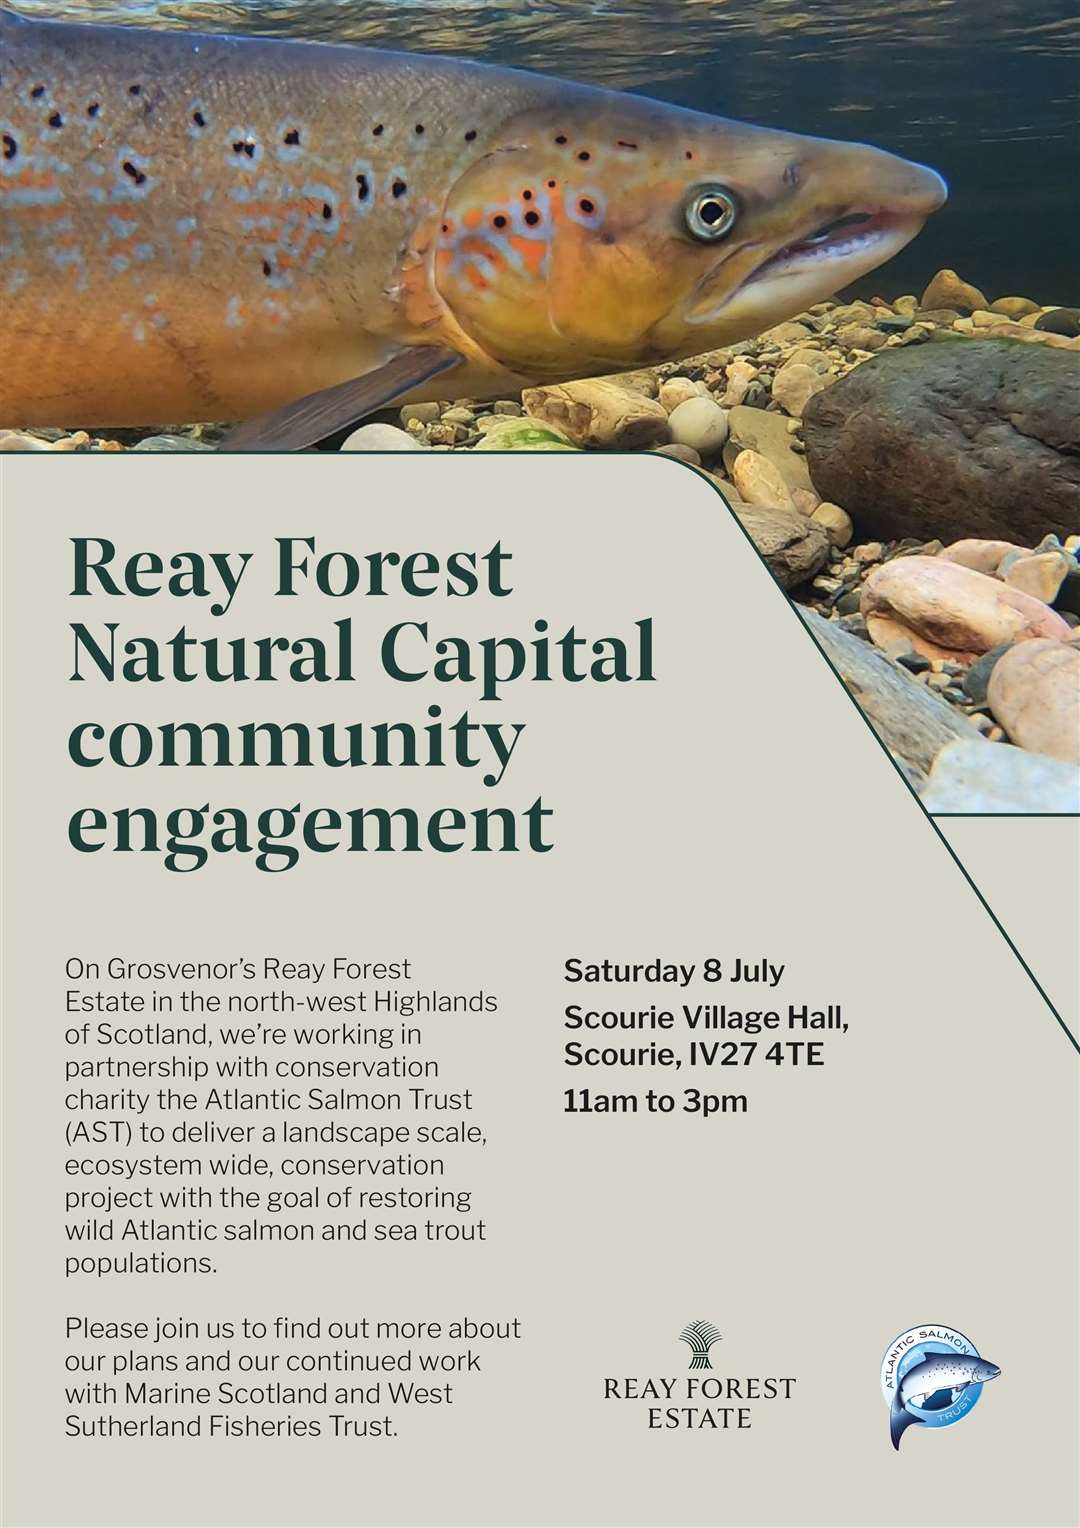 The event is to inform members of the public about a salmon and sea trout conservation project.